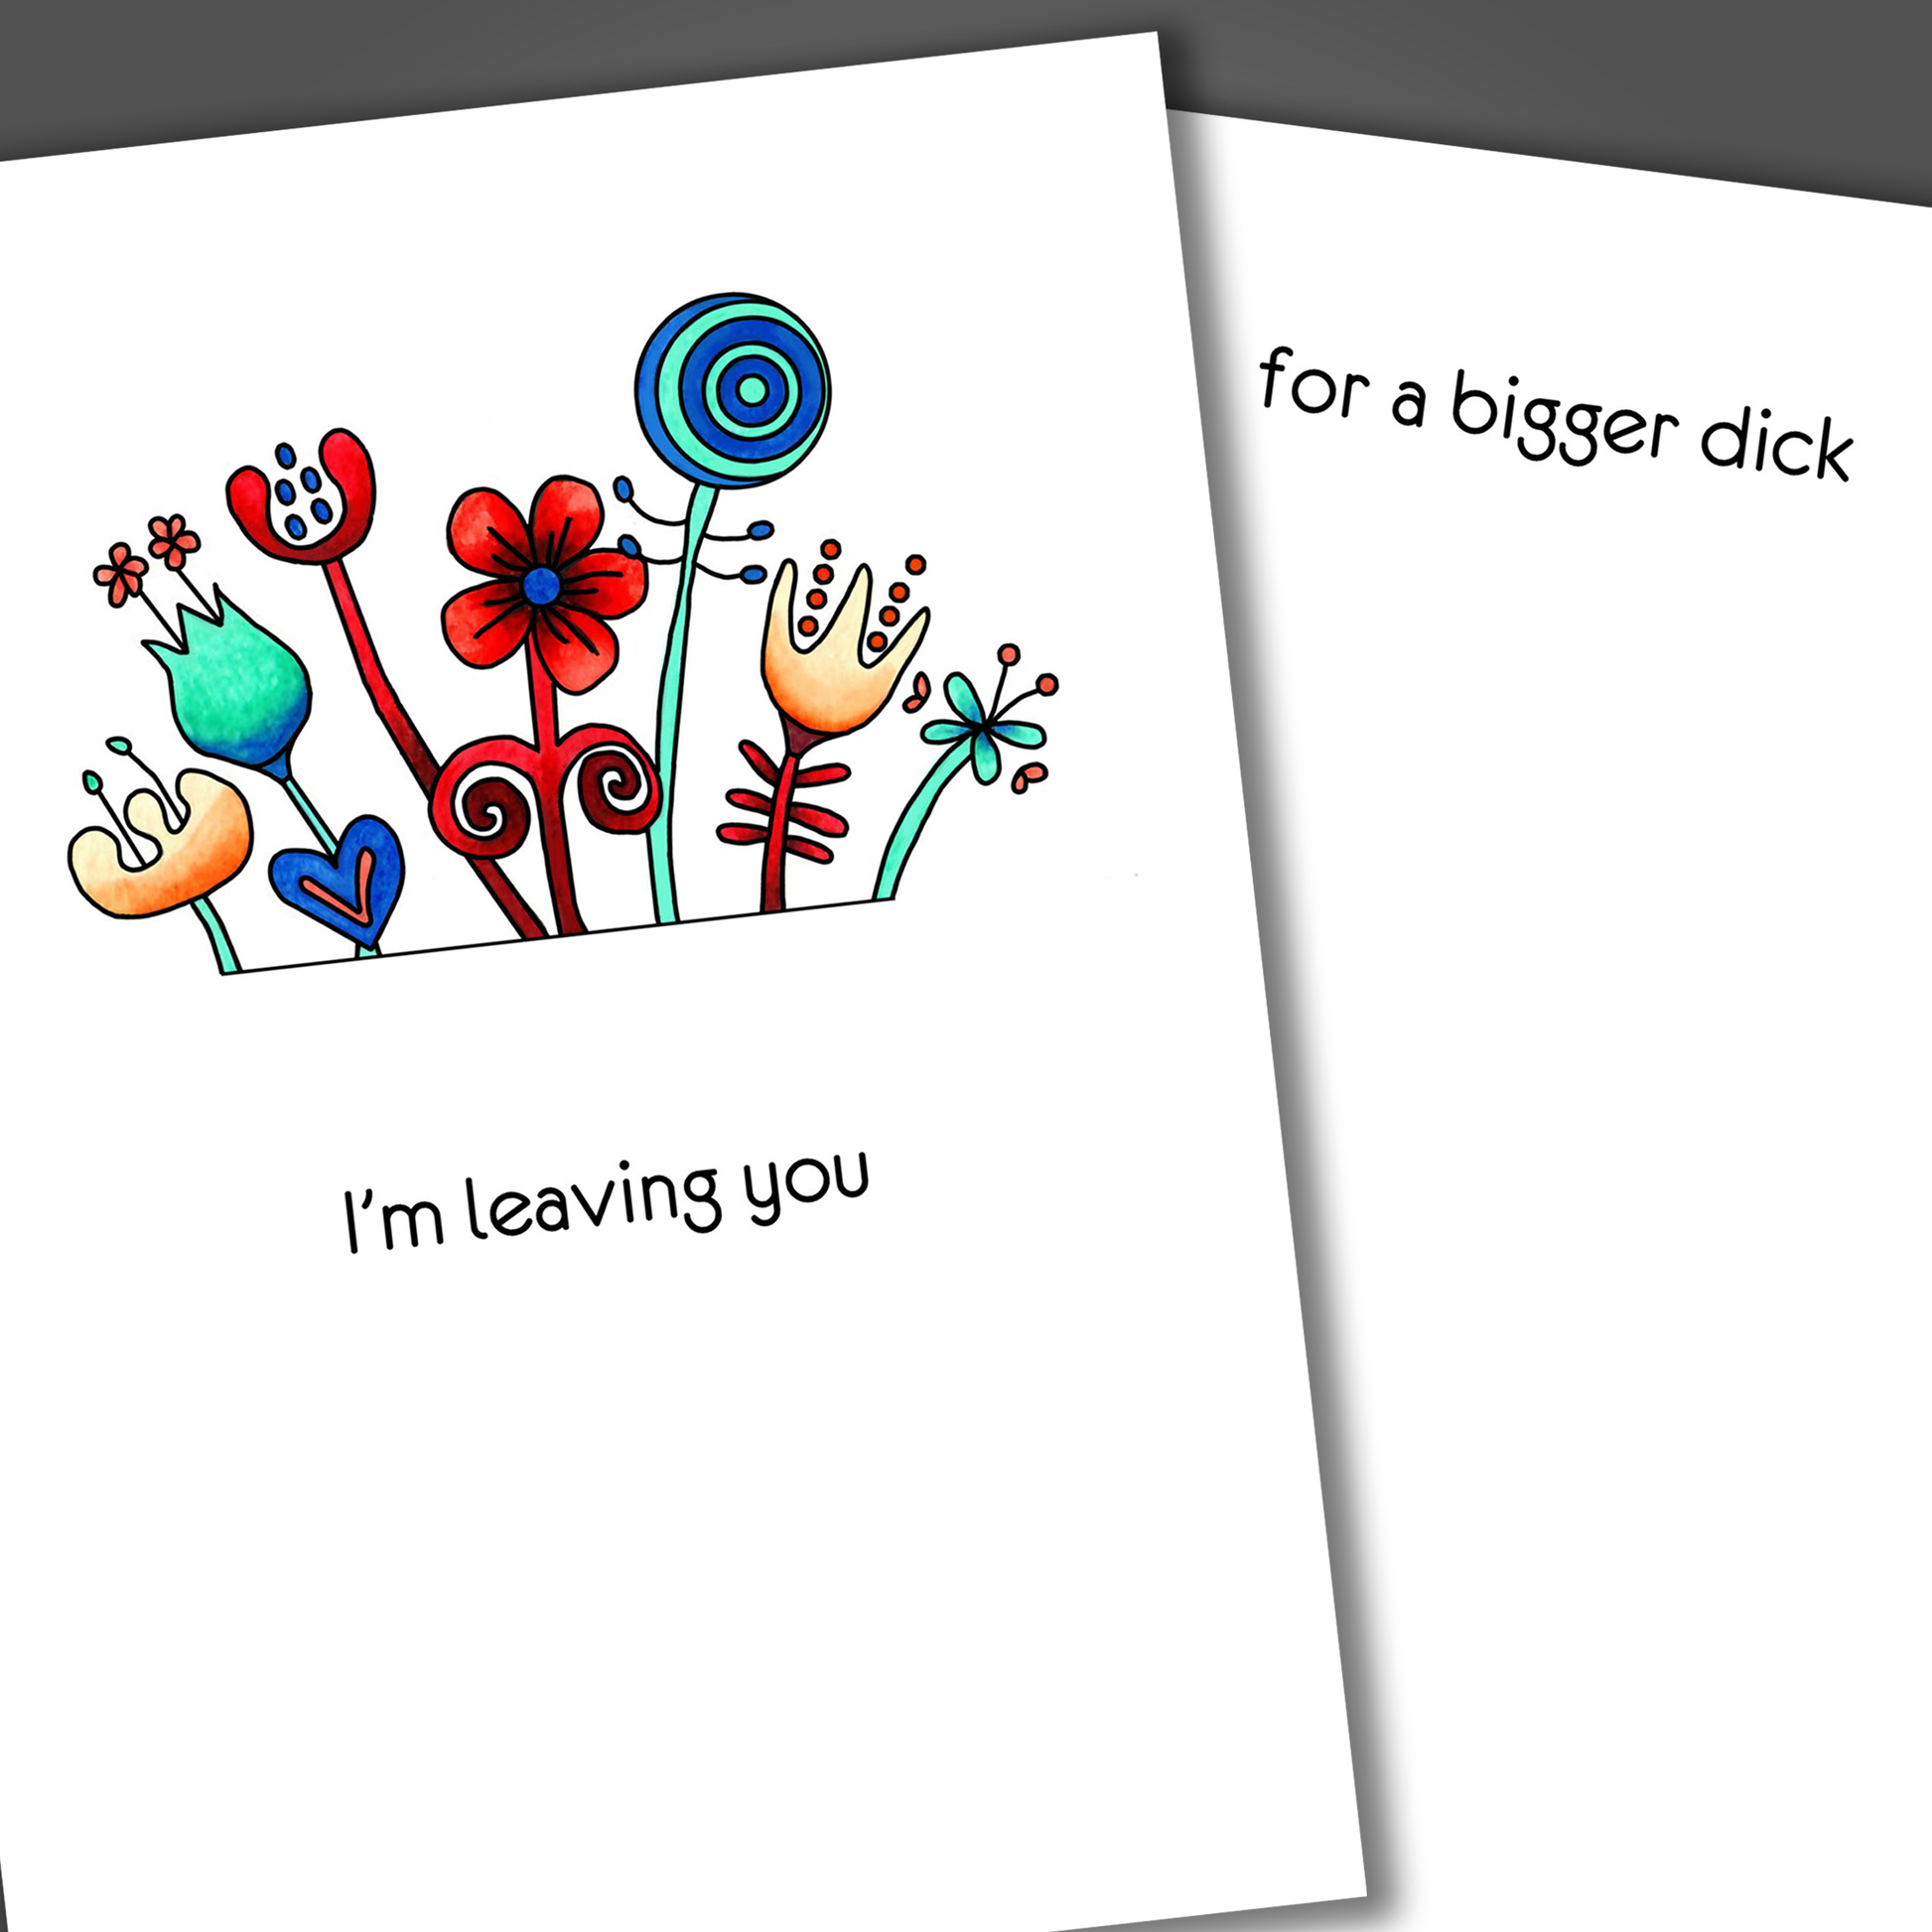 Funny divorce or breakup card with flowers of various colors drawn on the front of the card. Inside the card is a funny joke that says I am leaving you for a bigger dick.